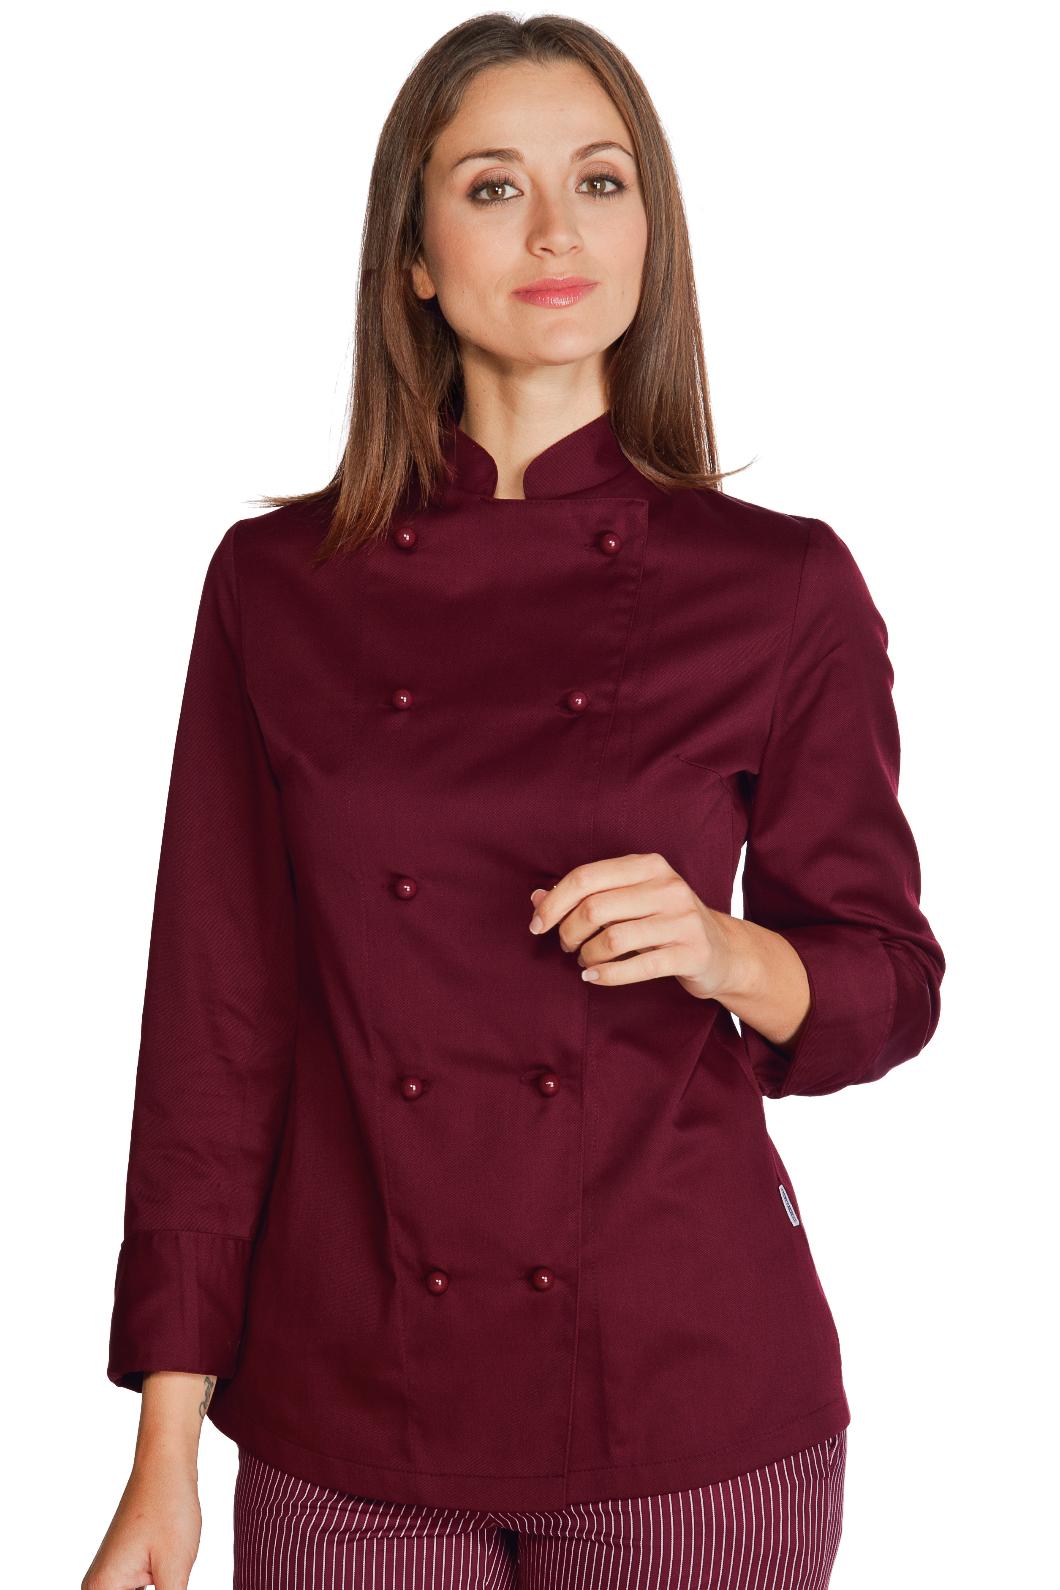 057503 - GIACCA LADY CHEF BORDEAUX